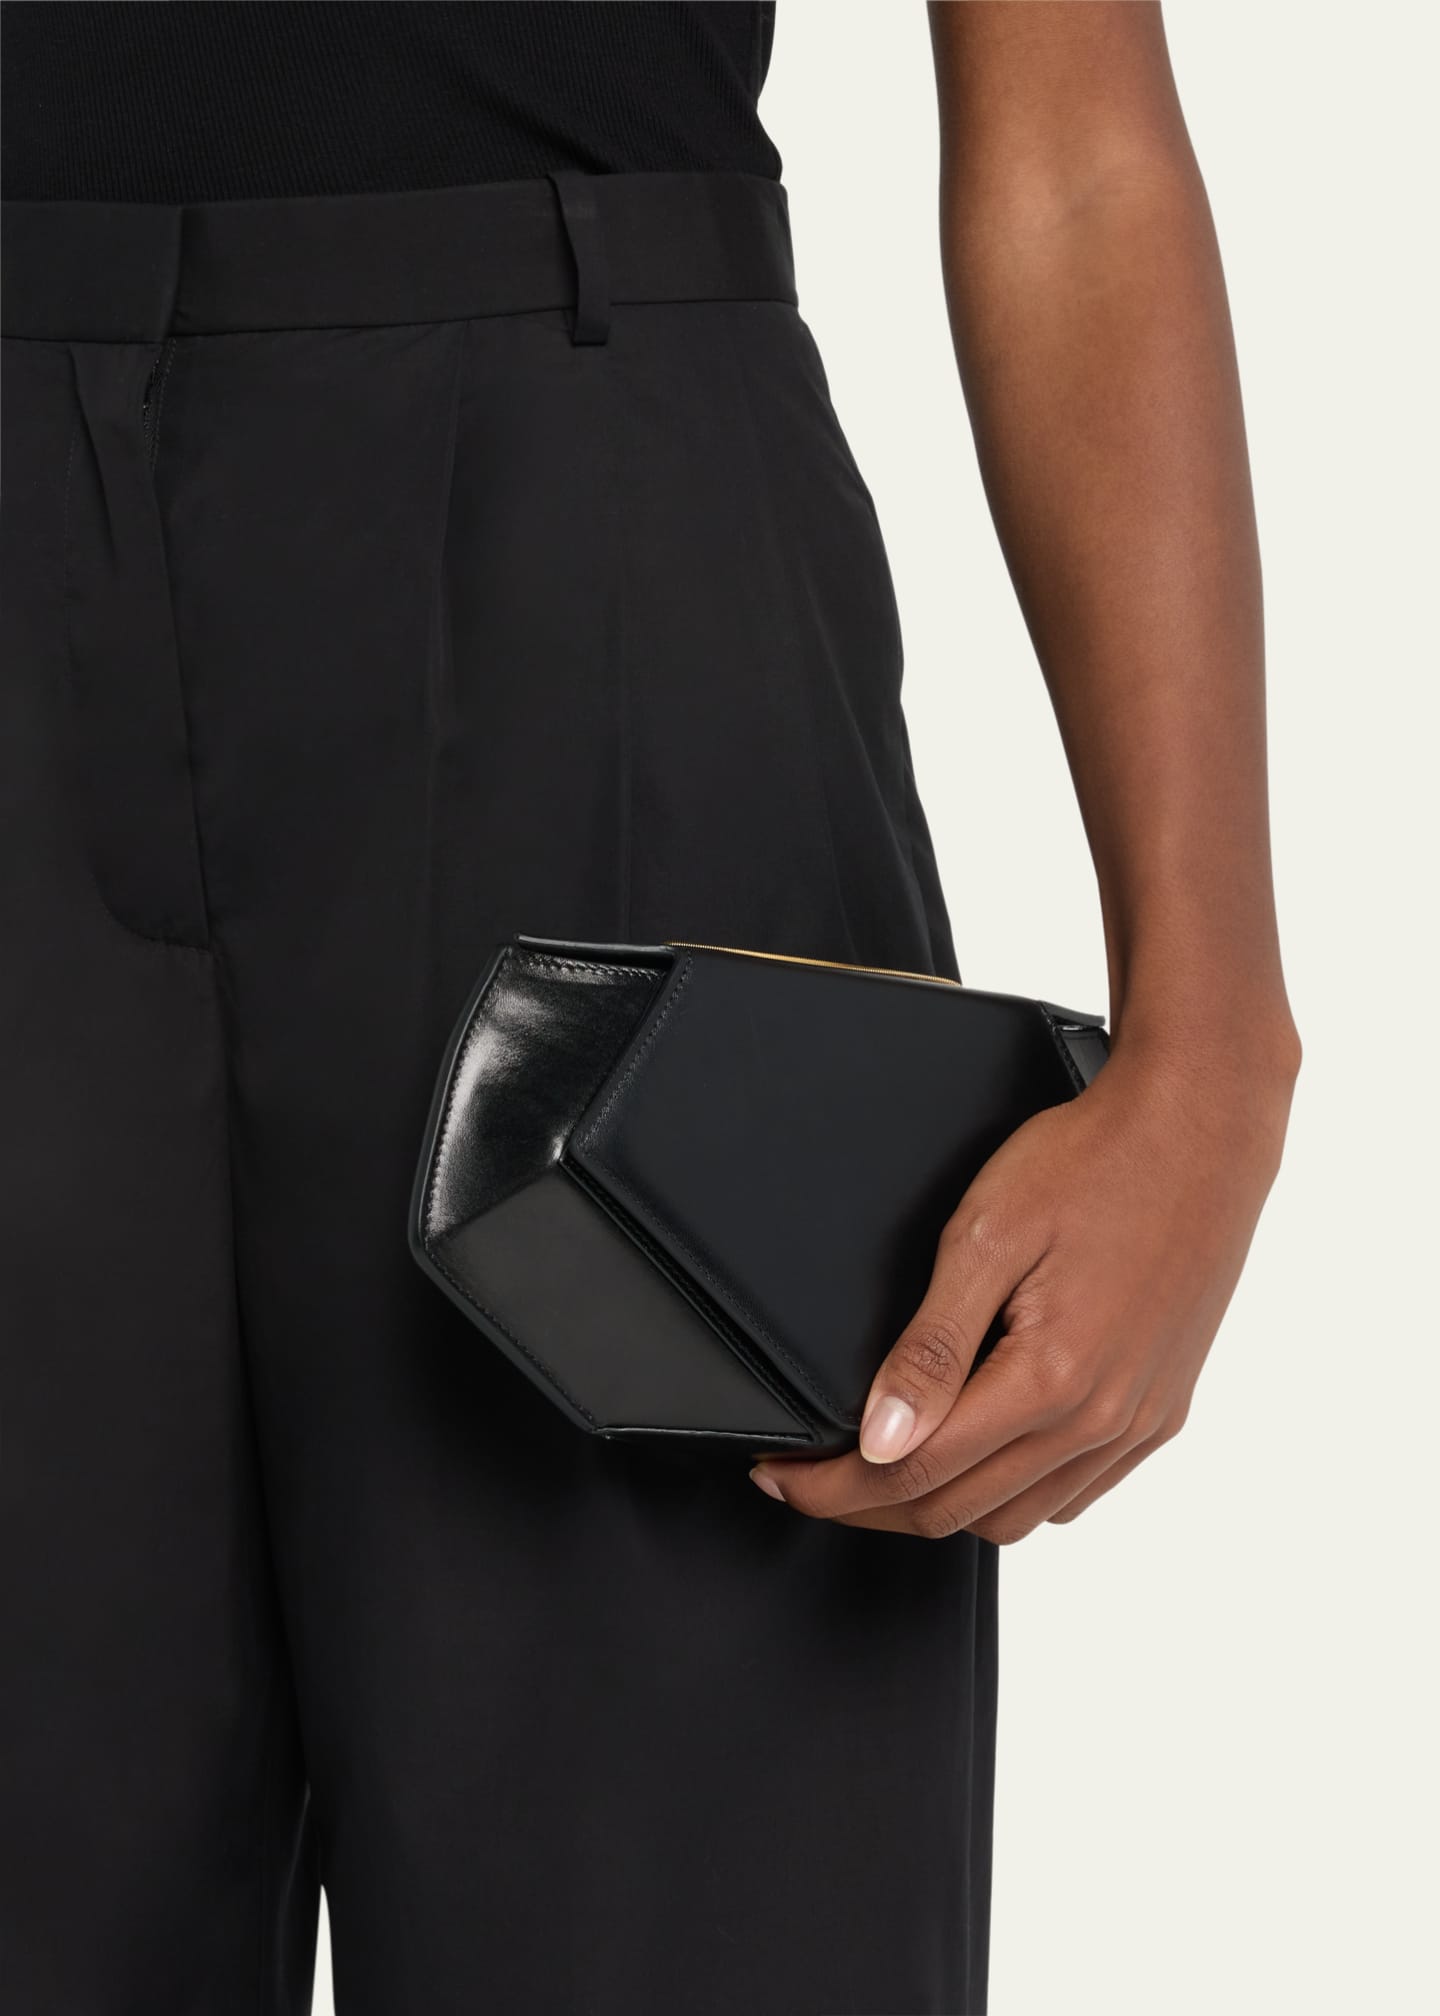 THE ROW Mae Evening Clutch Bag in Leather